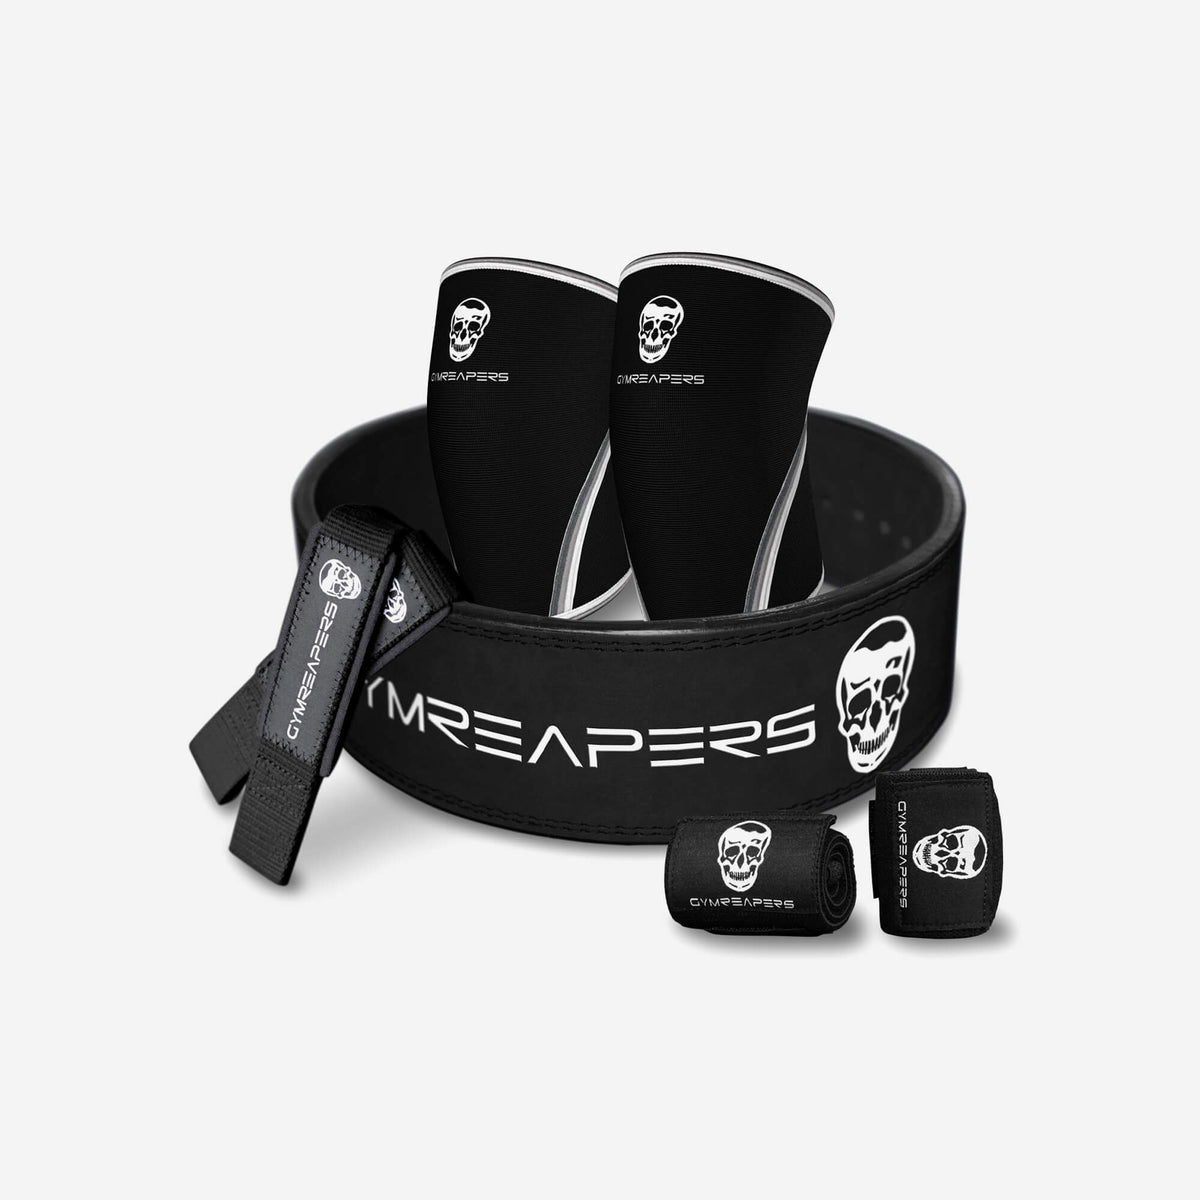 Gym Reapers - Latest Emails, Sales & Deals